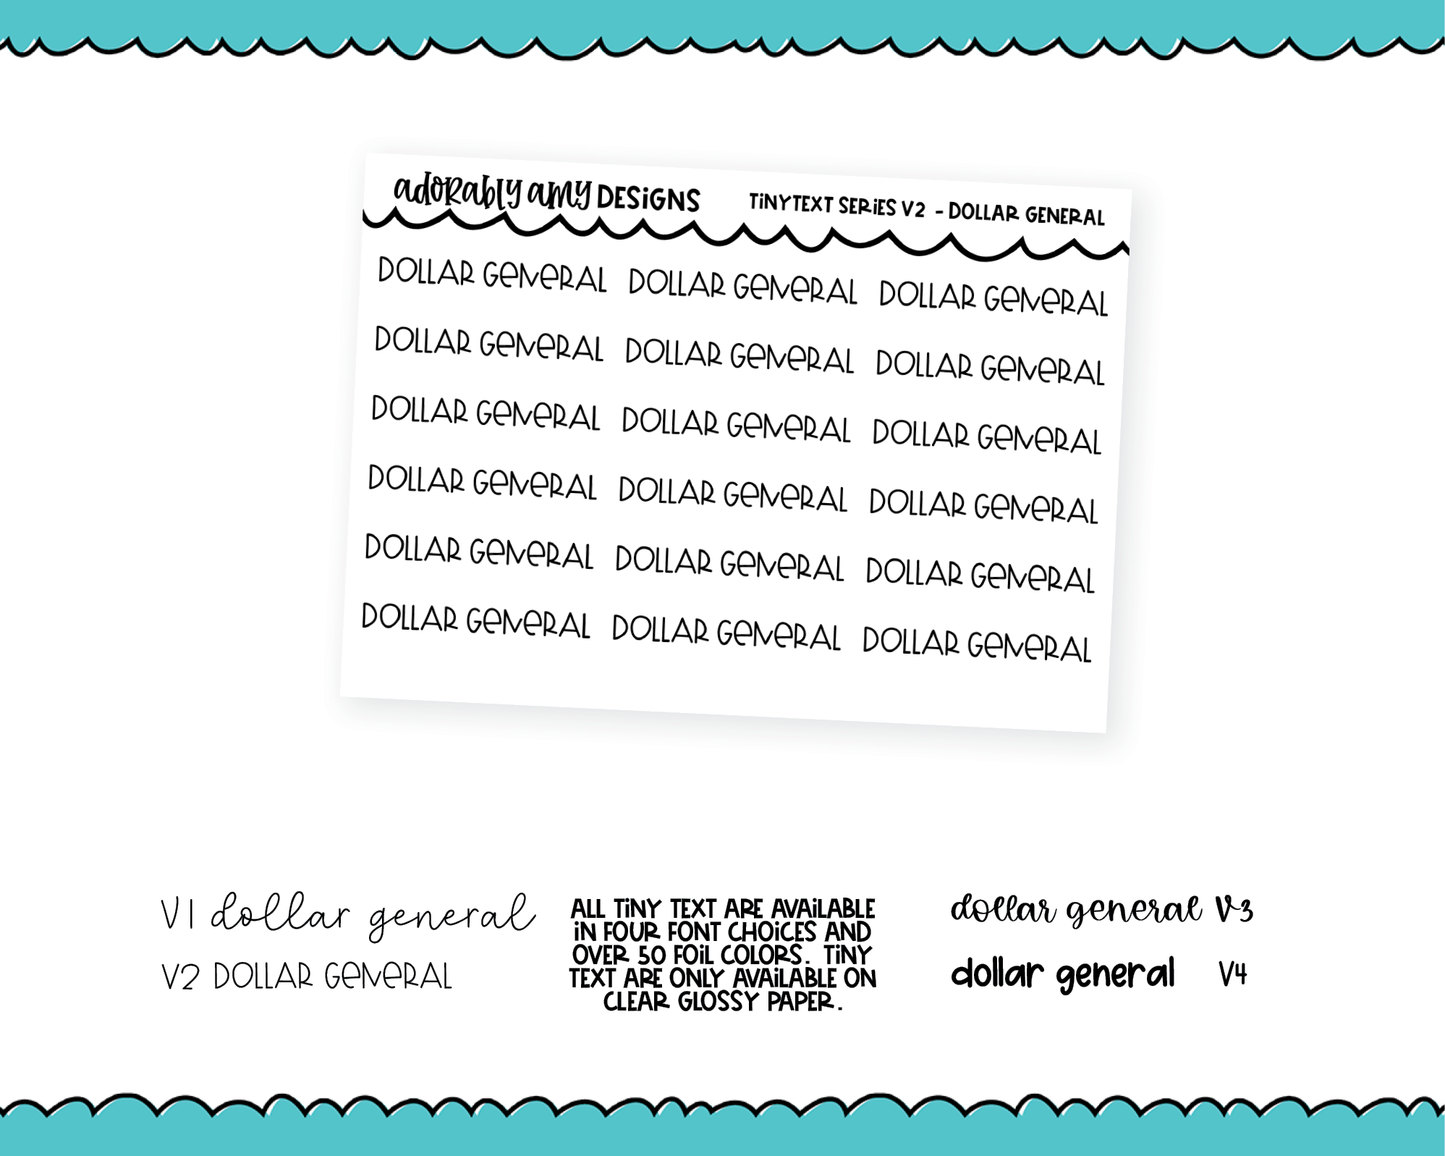 Foiled Tiny Text Series - Dollar General Checklist Size Planner Stickers for any Planner or Insert